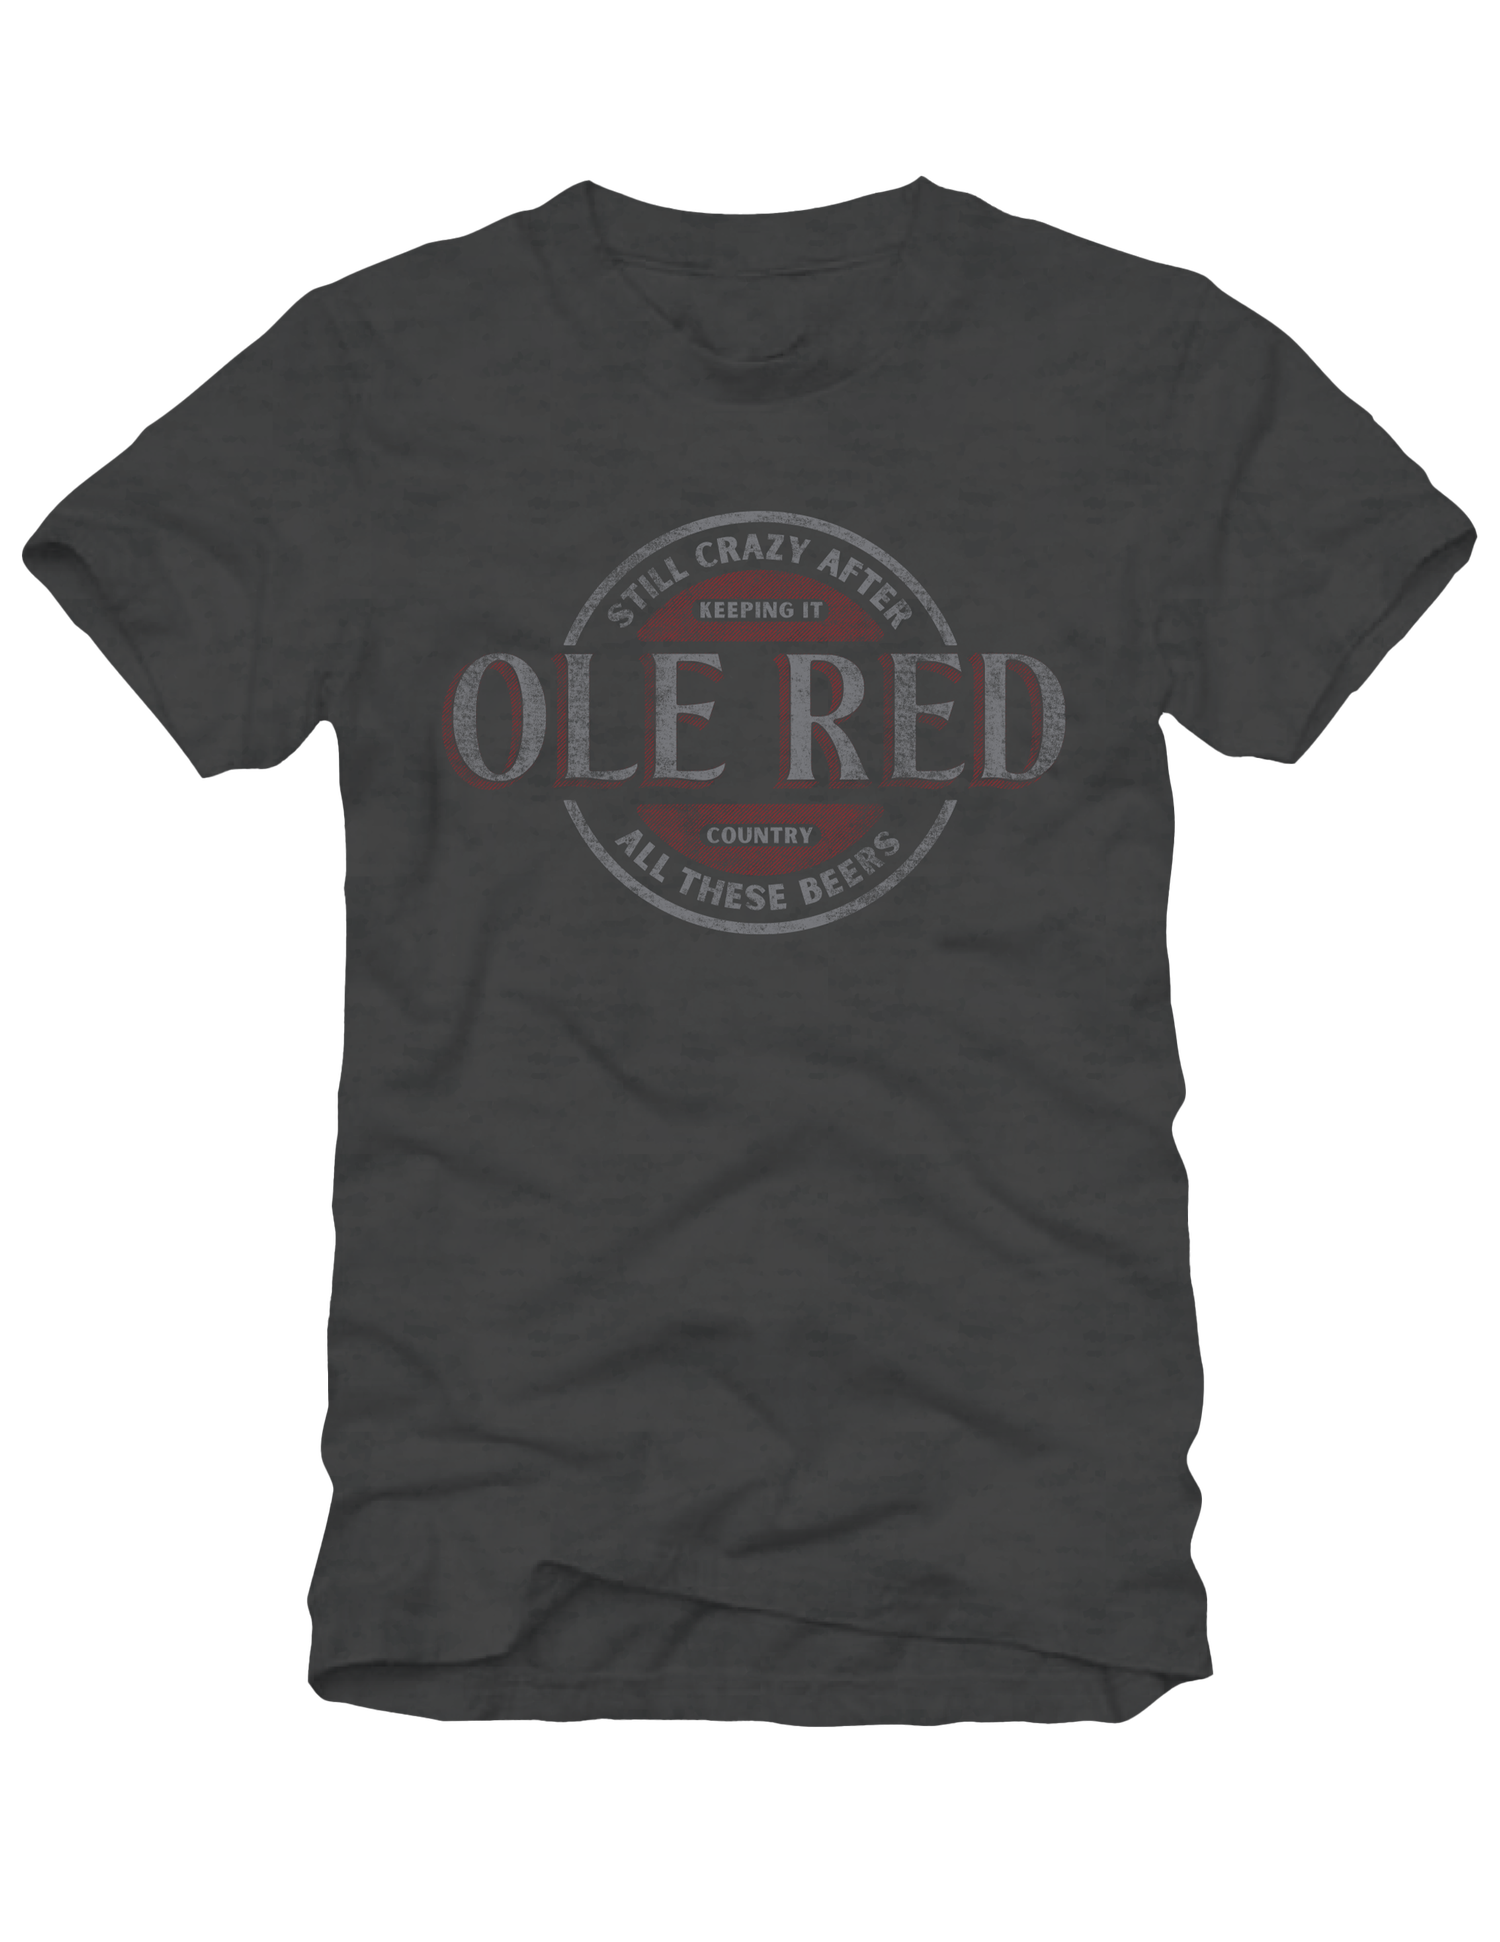 Ole Red Still Crazy After Beers T-Shirt